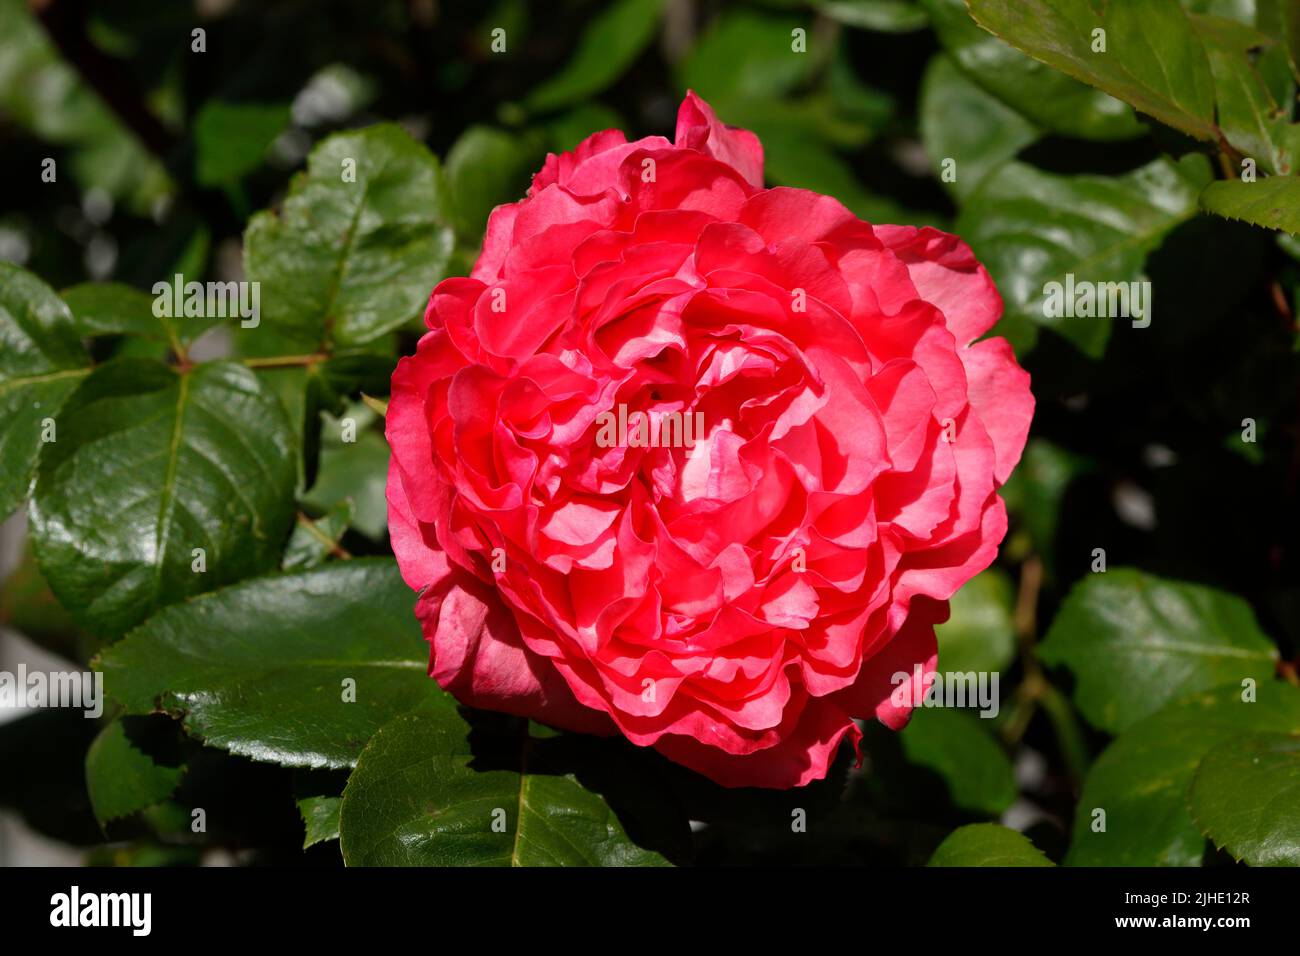 Red rose, green background, Germany Stock Photo